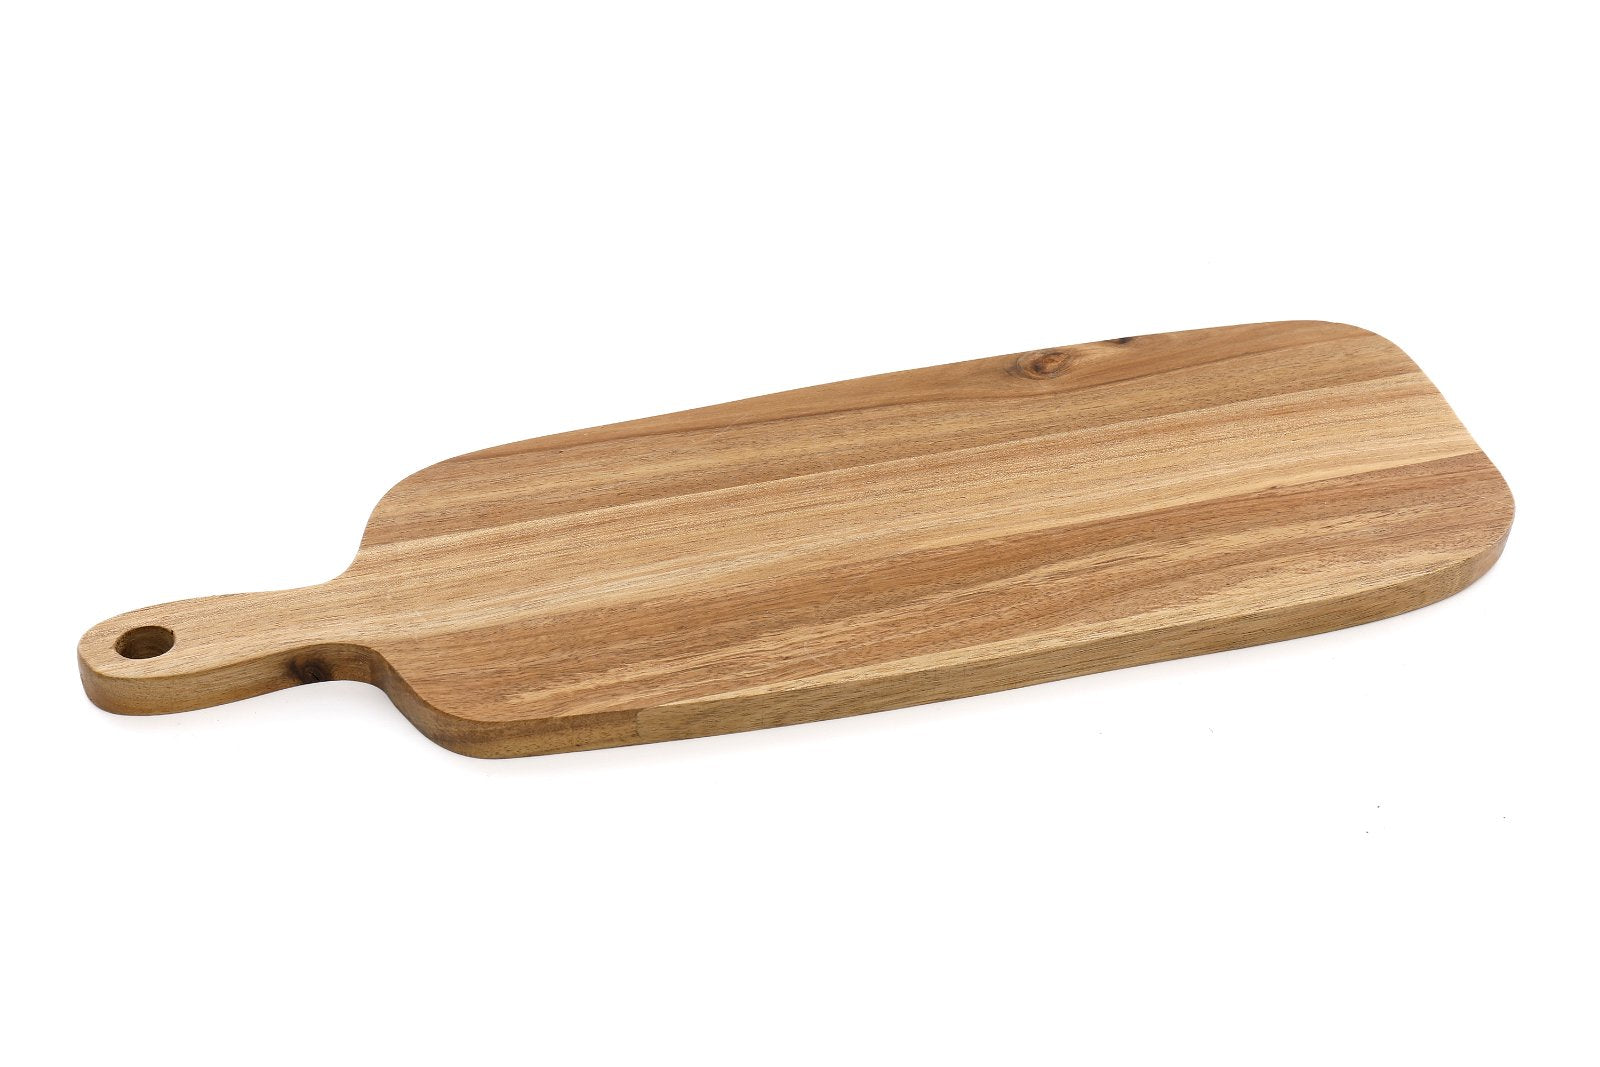 A wooden serving board